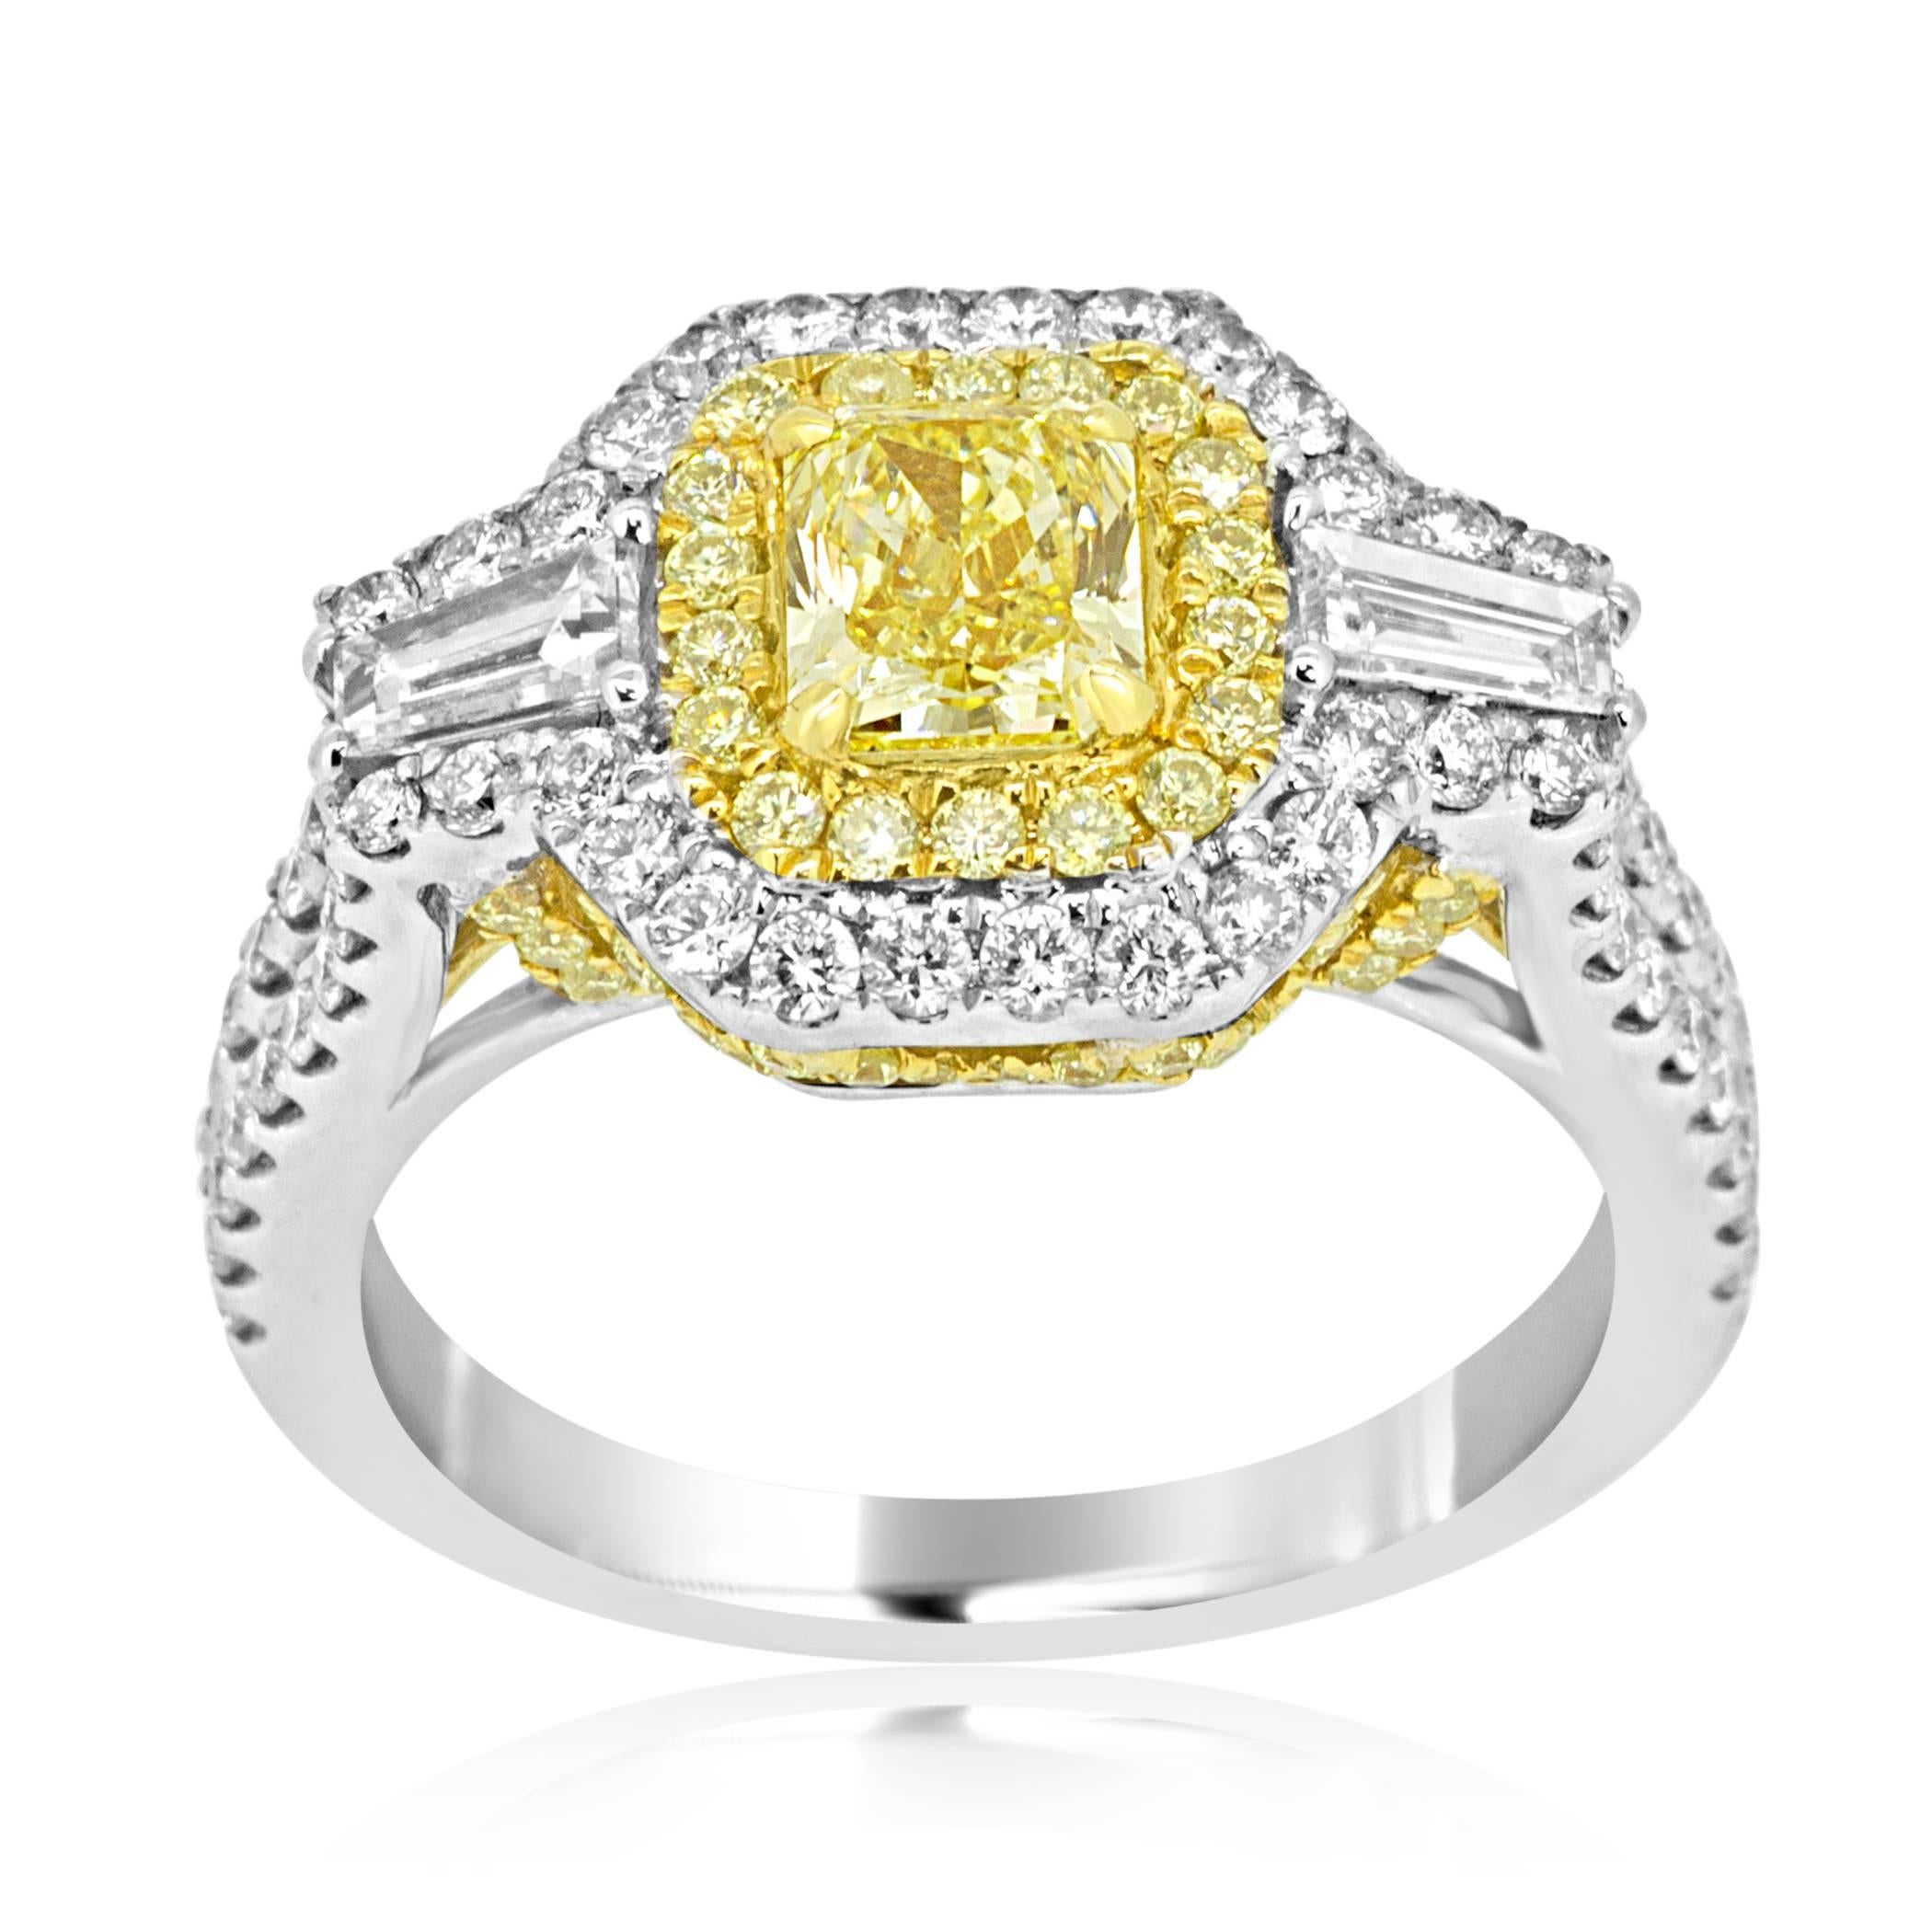 EGL USA  Certified Fancy Intense Yellow Radiant SI1 0.81 Carat in Double Halo of natural Fancy Yellow Rounds Diamonds VS-SI Clarity 0.39 Carat and White G-H Color VS-SI clarity Diamond 0.70 Carat  Flanked by 2 White G-H Color VS Vlarity Diamond